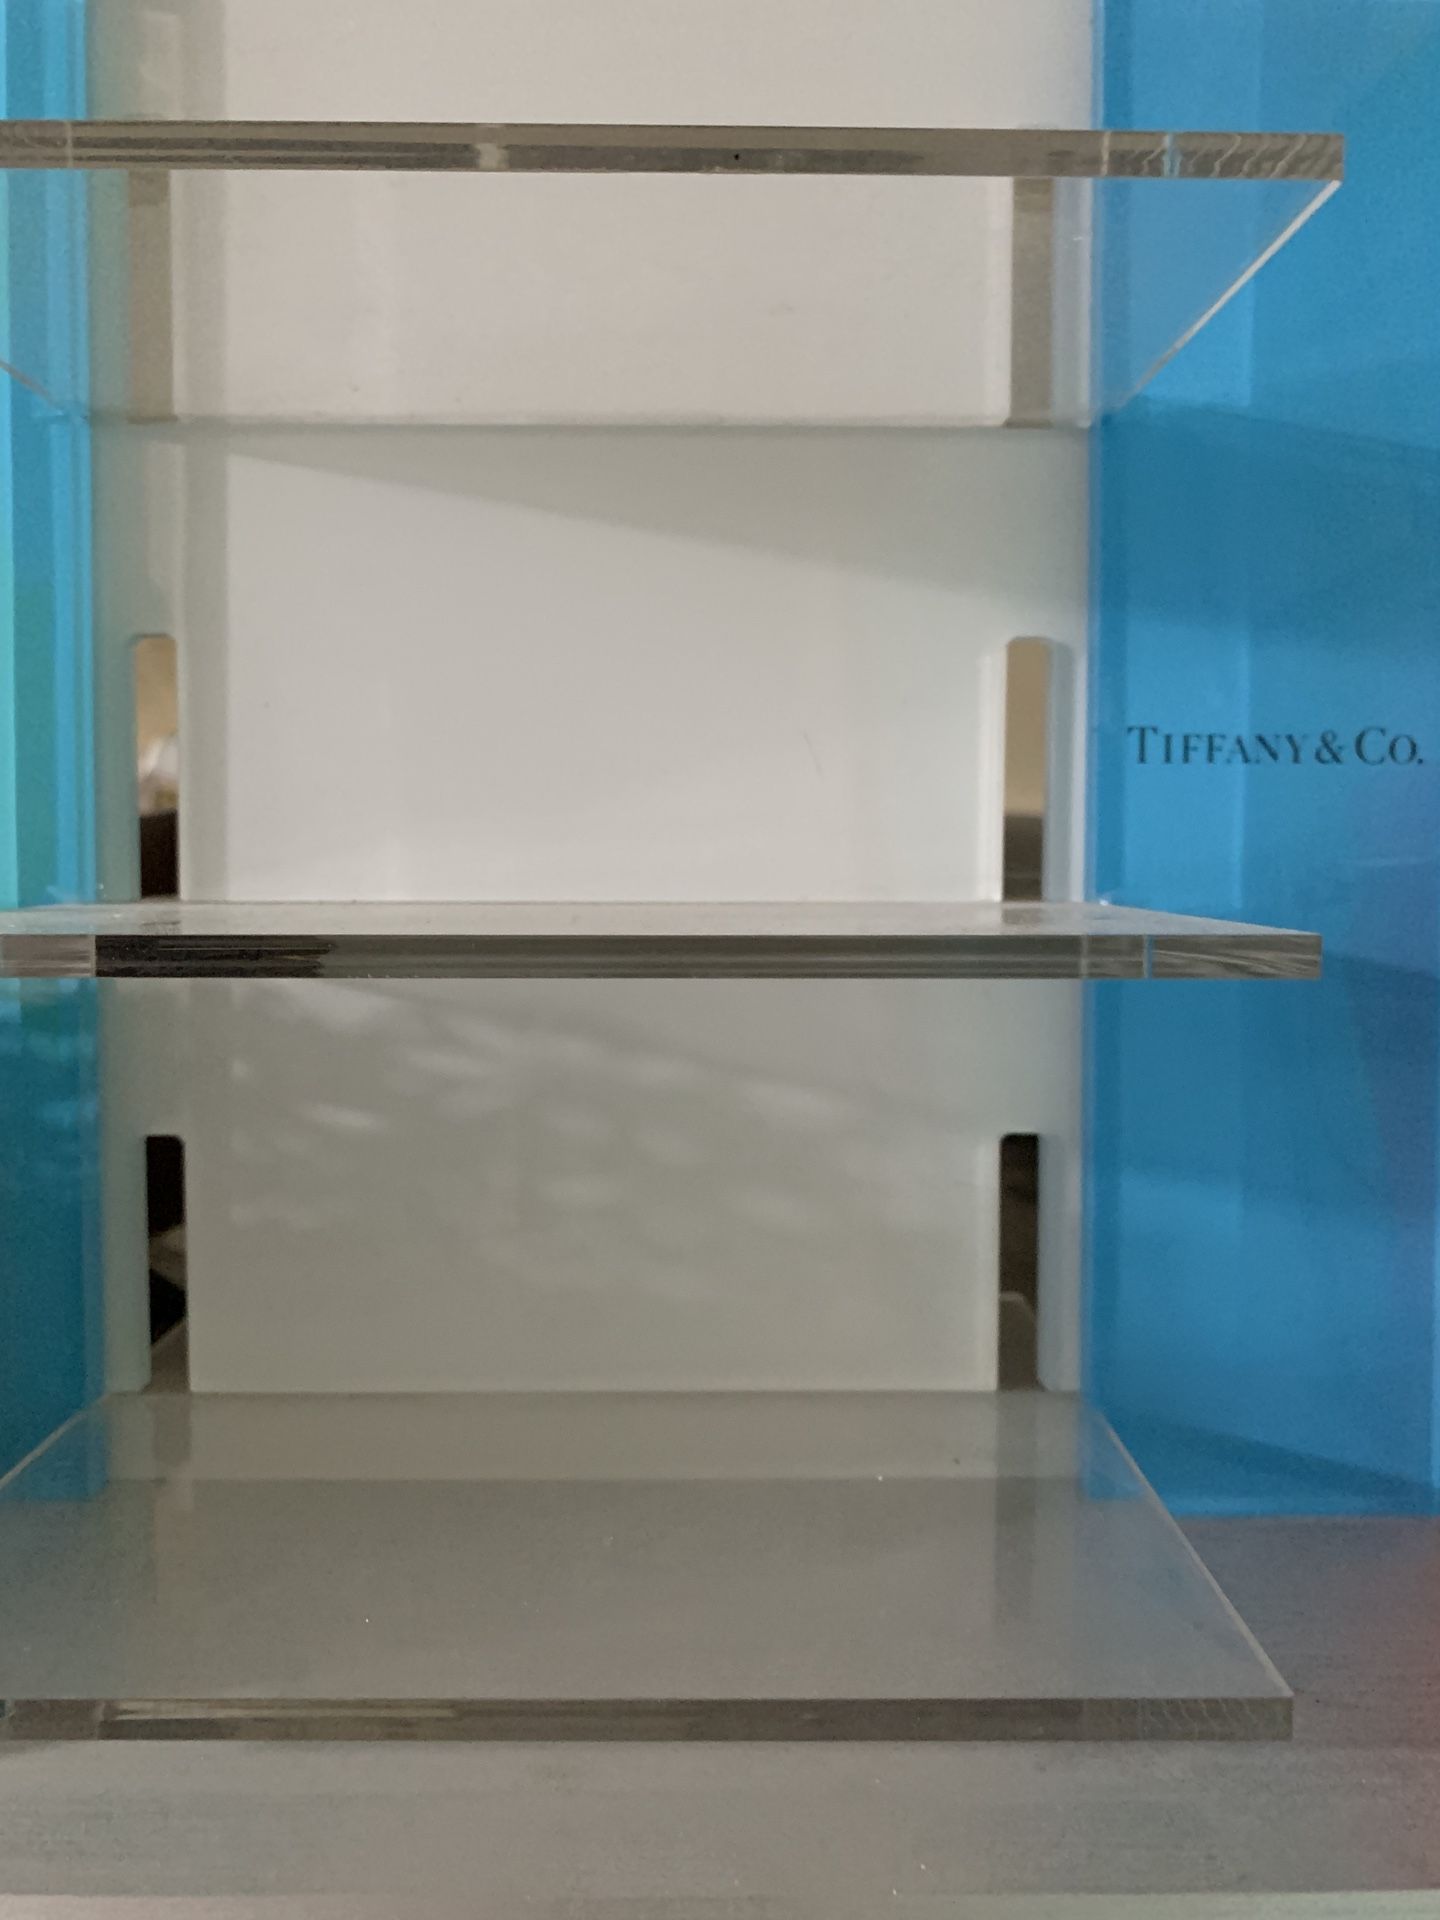 Tiffany and co Display Case